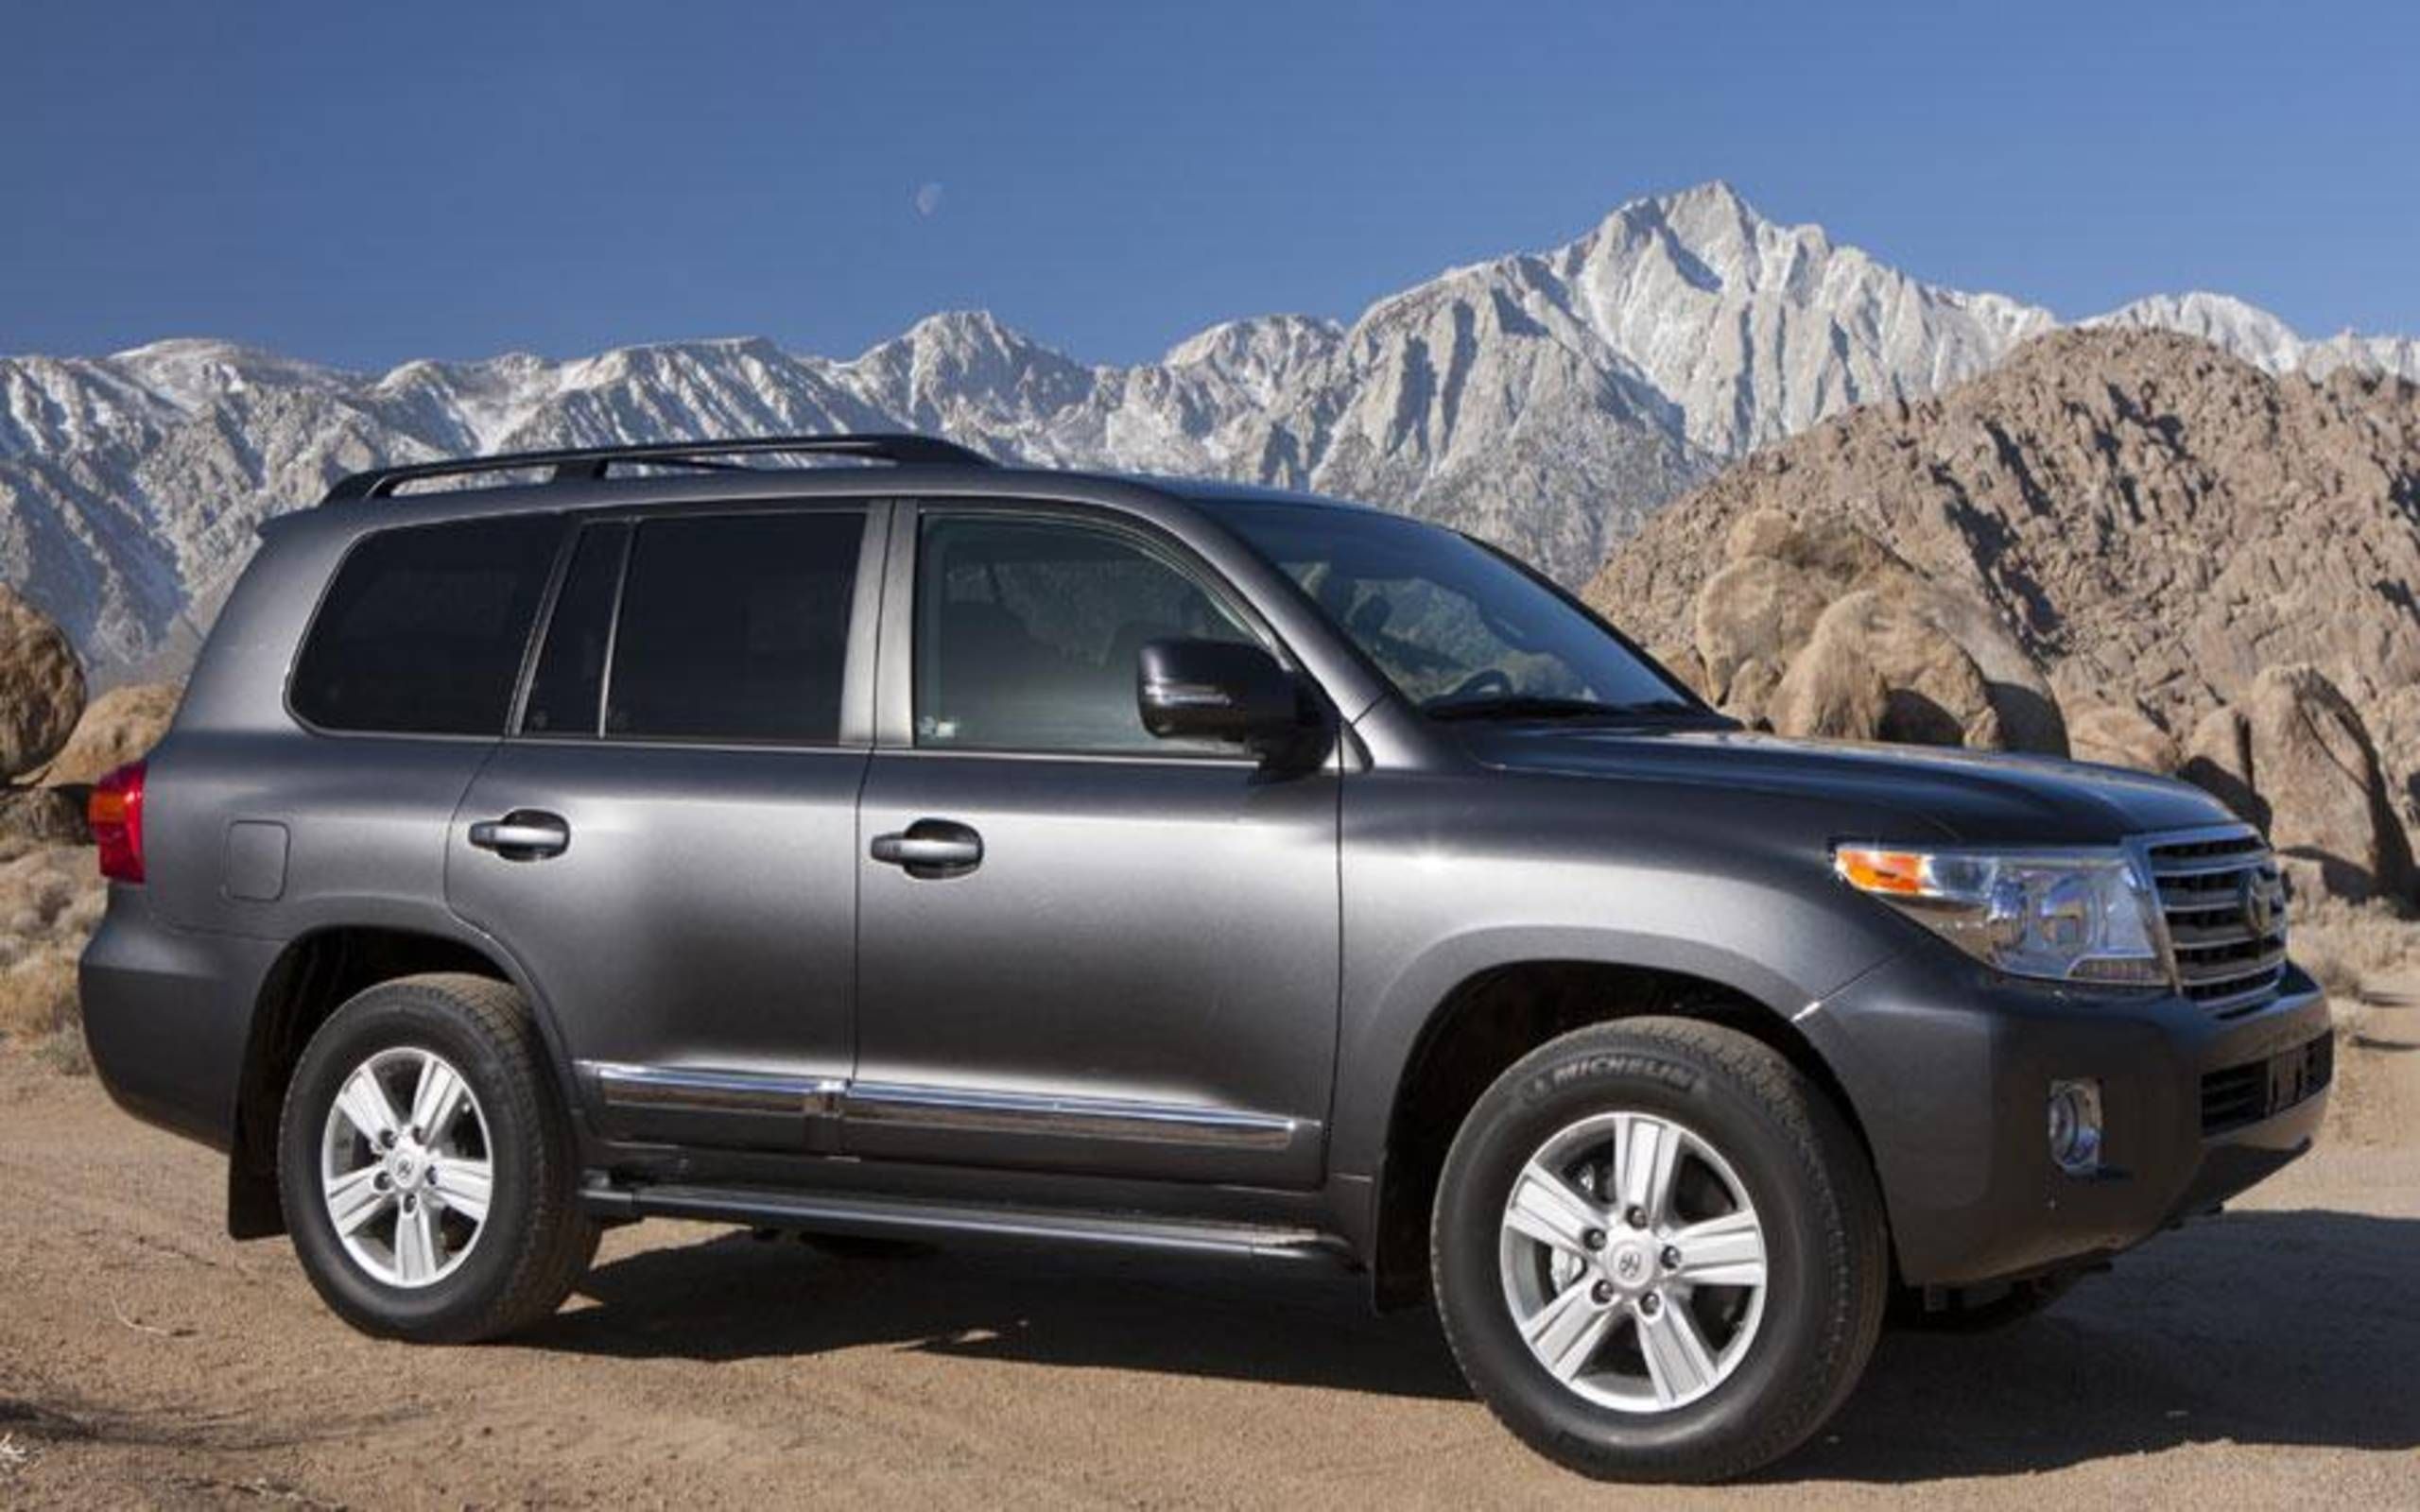 2013 Toyota Land Cruiser review notes